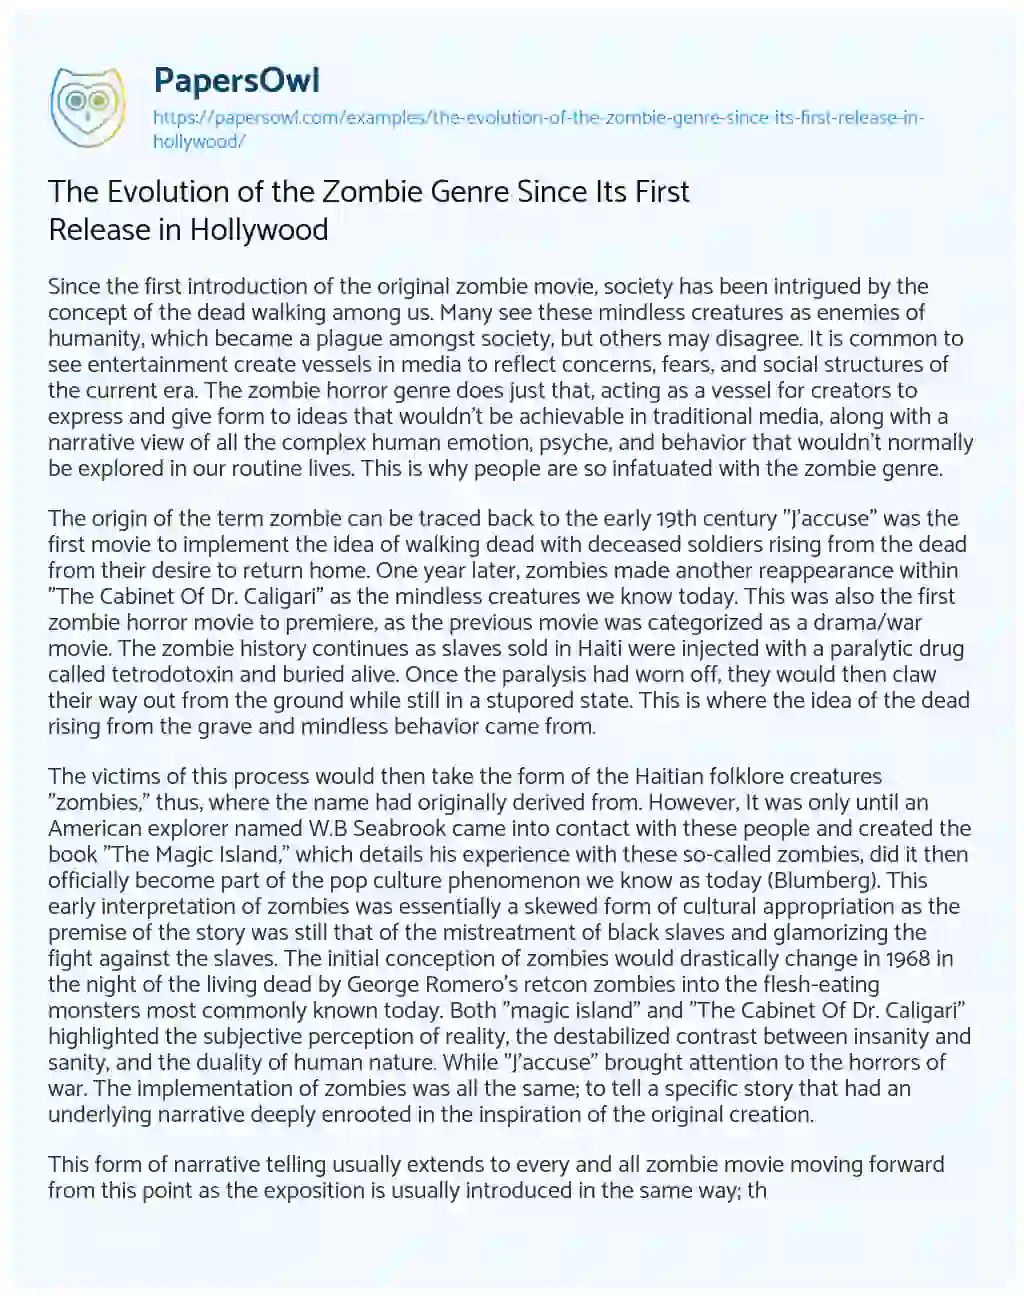 Essay on The Evolution of the Zombie Genre Since its First Release in Hollywood